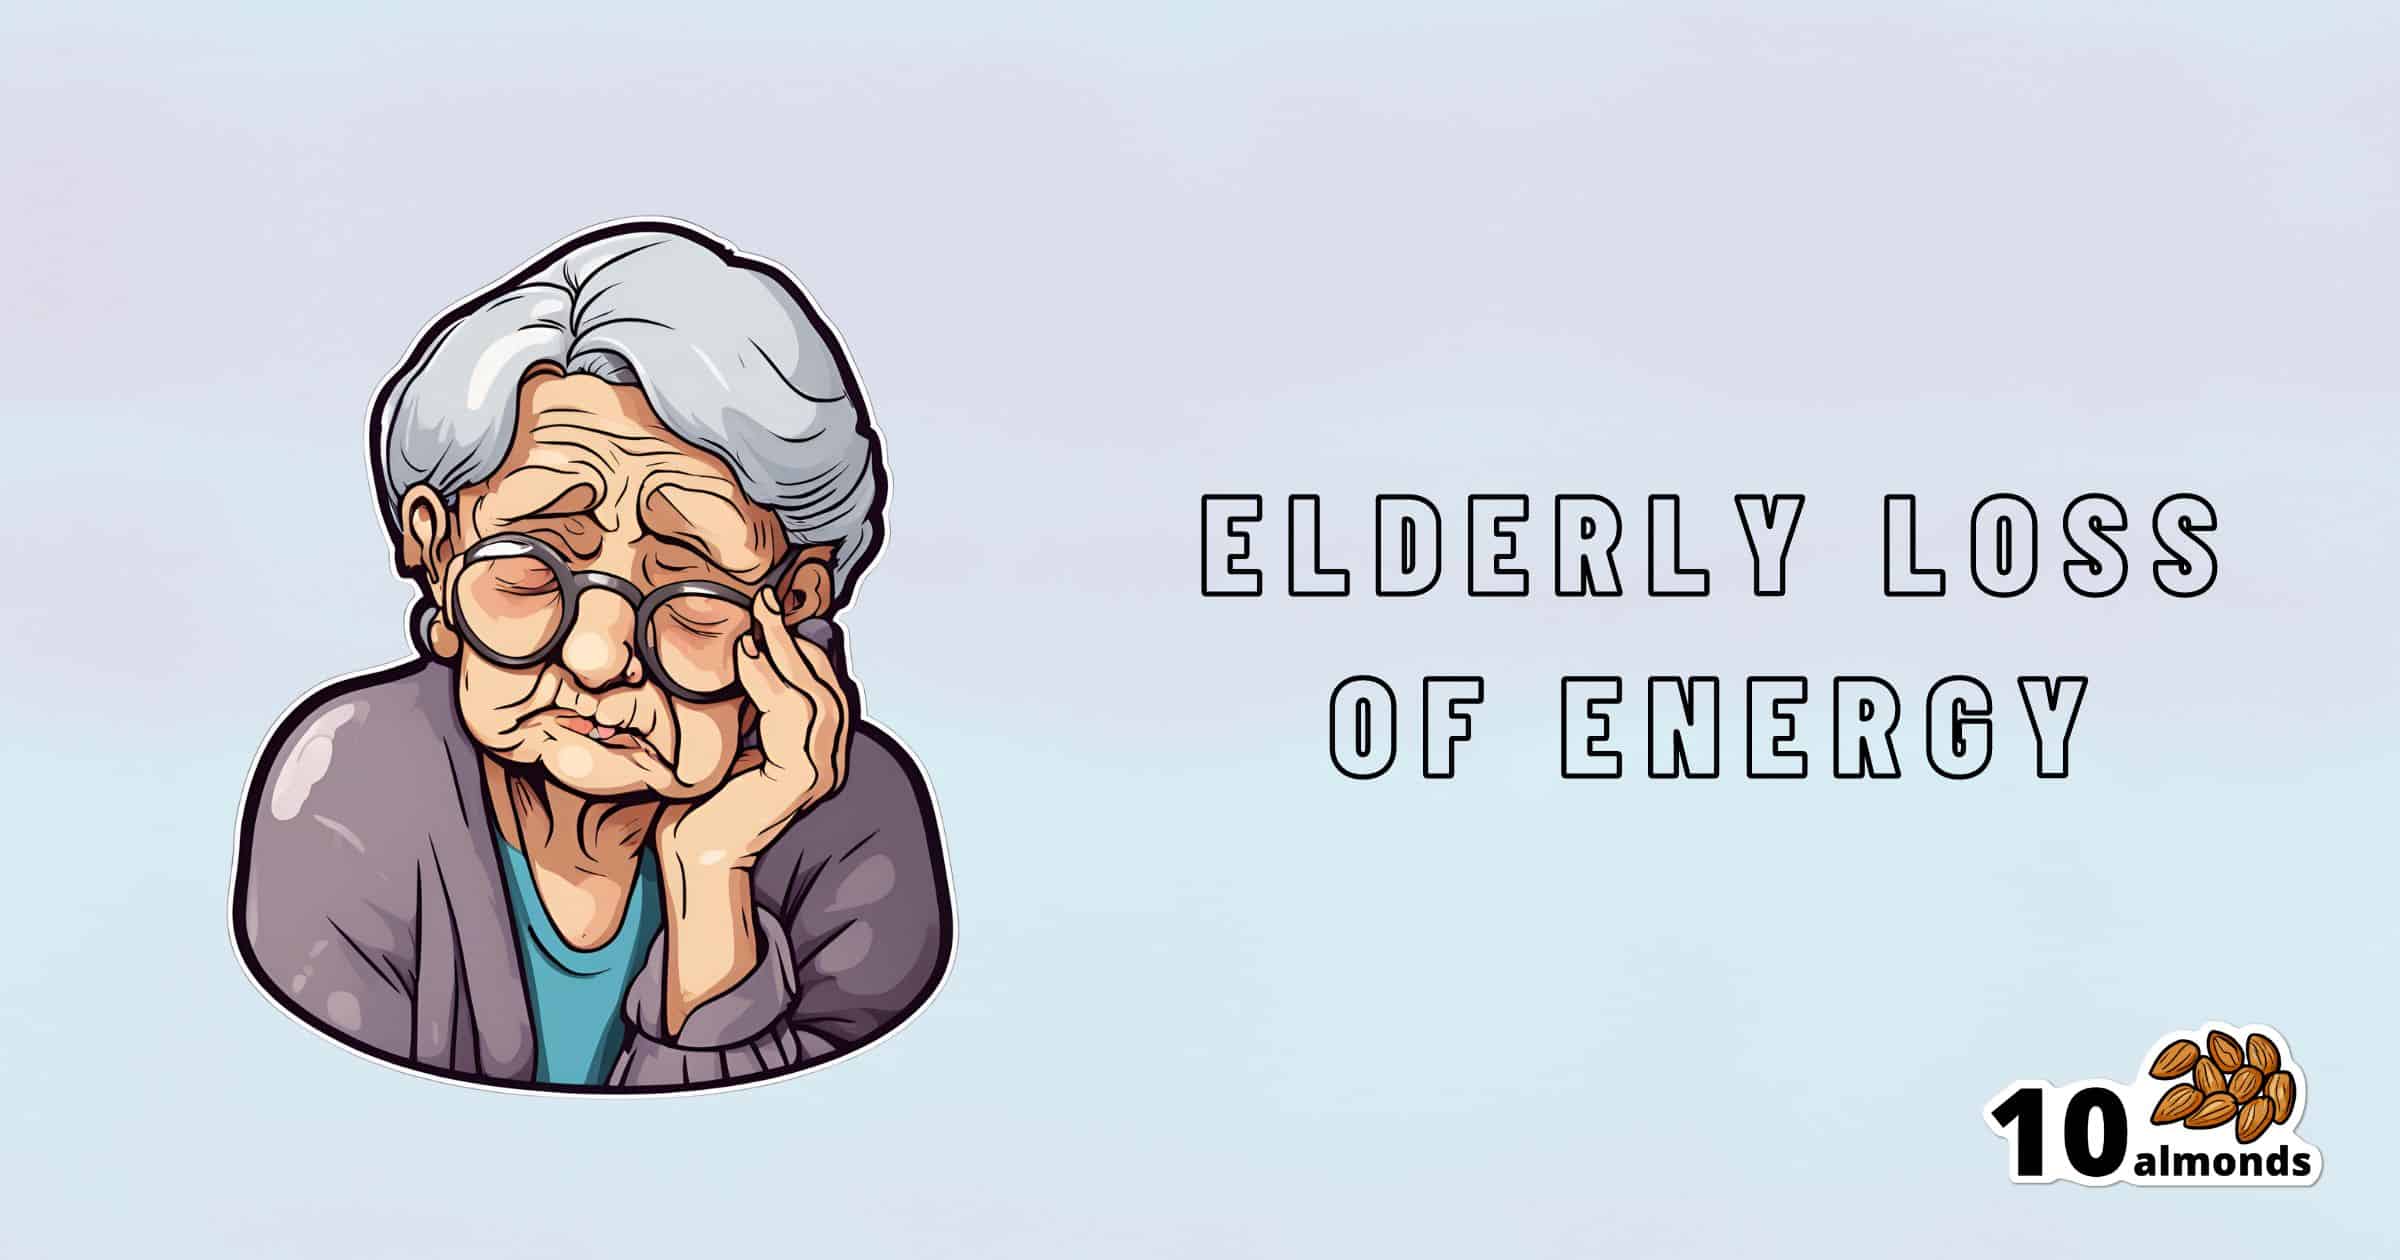 Illustration of an elderly person with gray hair, glasses, and a purple cardigan. The individual appears to be tired, resting their head on one hand. Text next to the image reads "Elderly Loss of Energy" with an icon of 10 almonds at the bottom right corner.